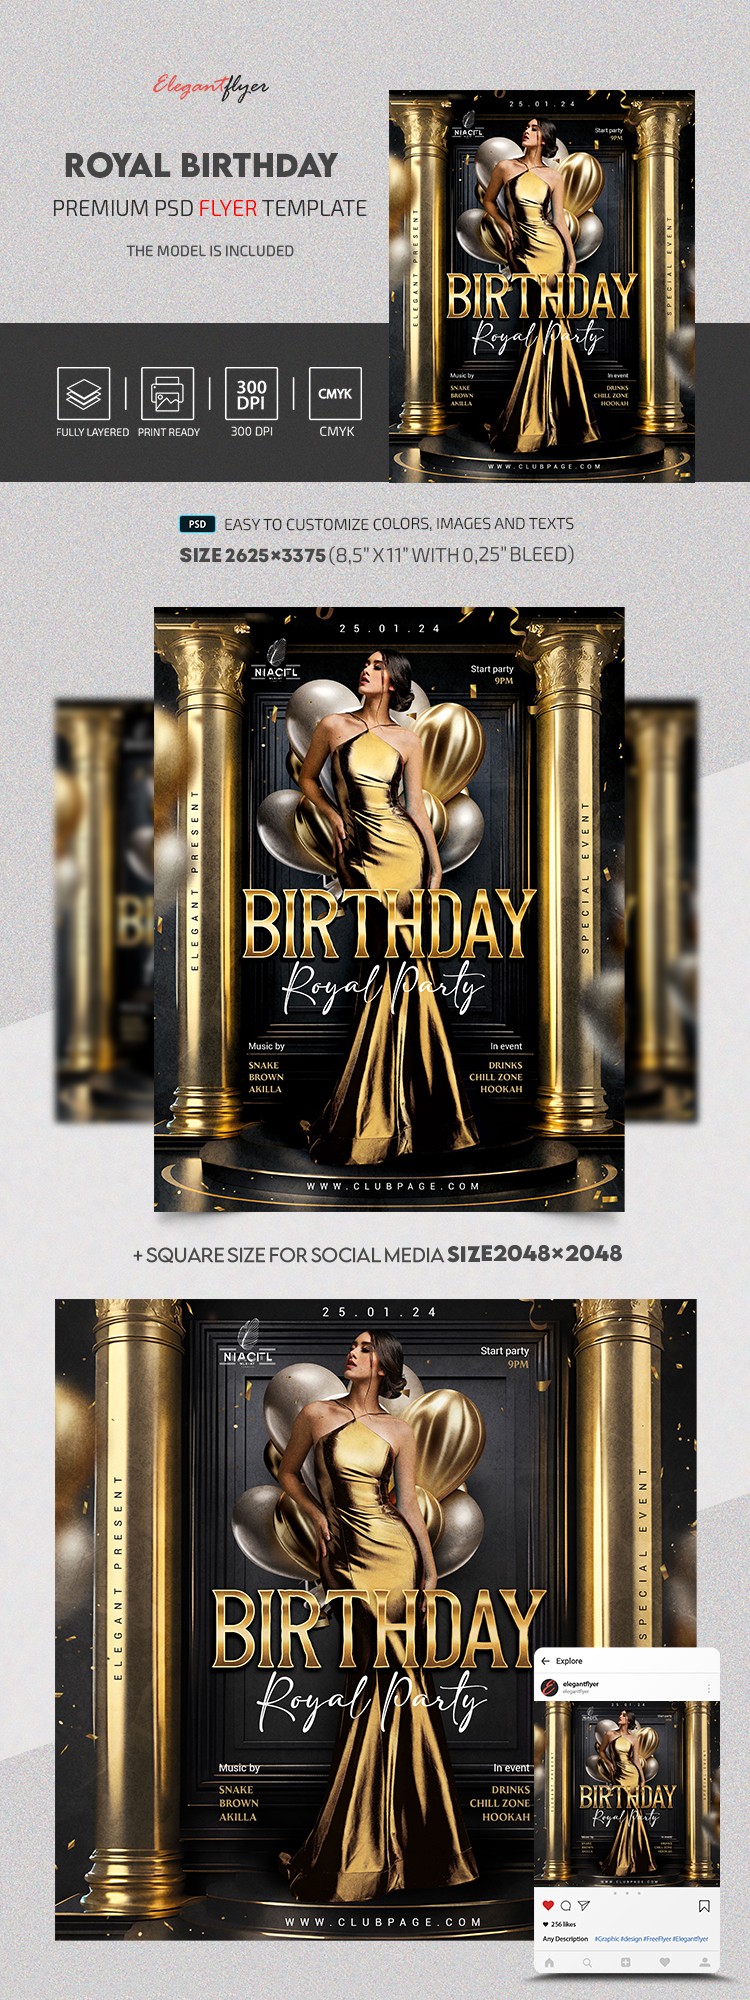 Compleanno reale by ElegantFlyer